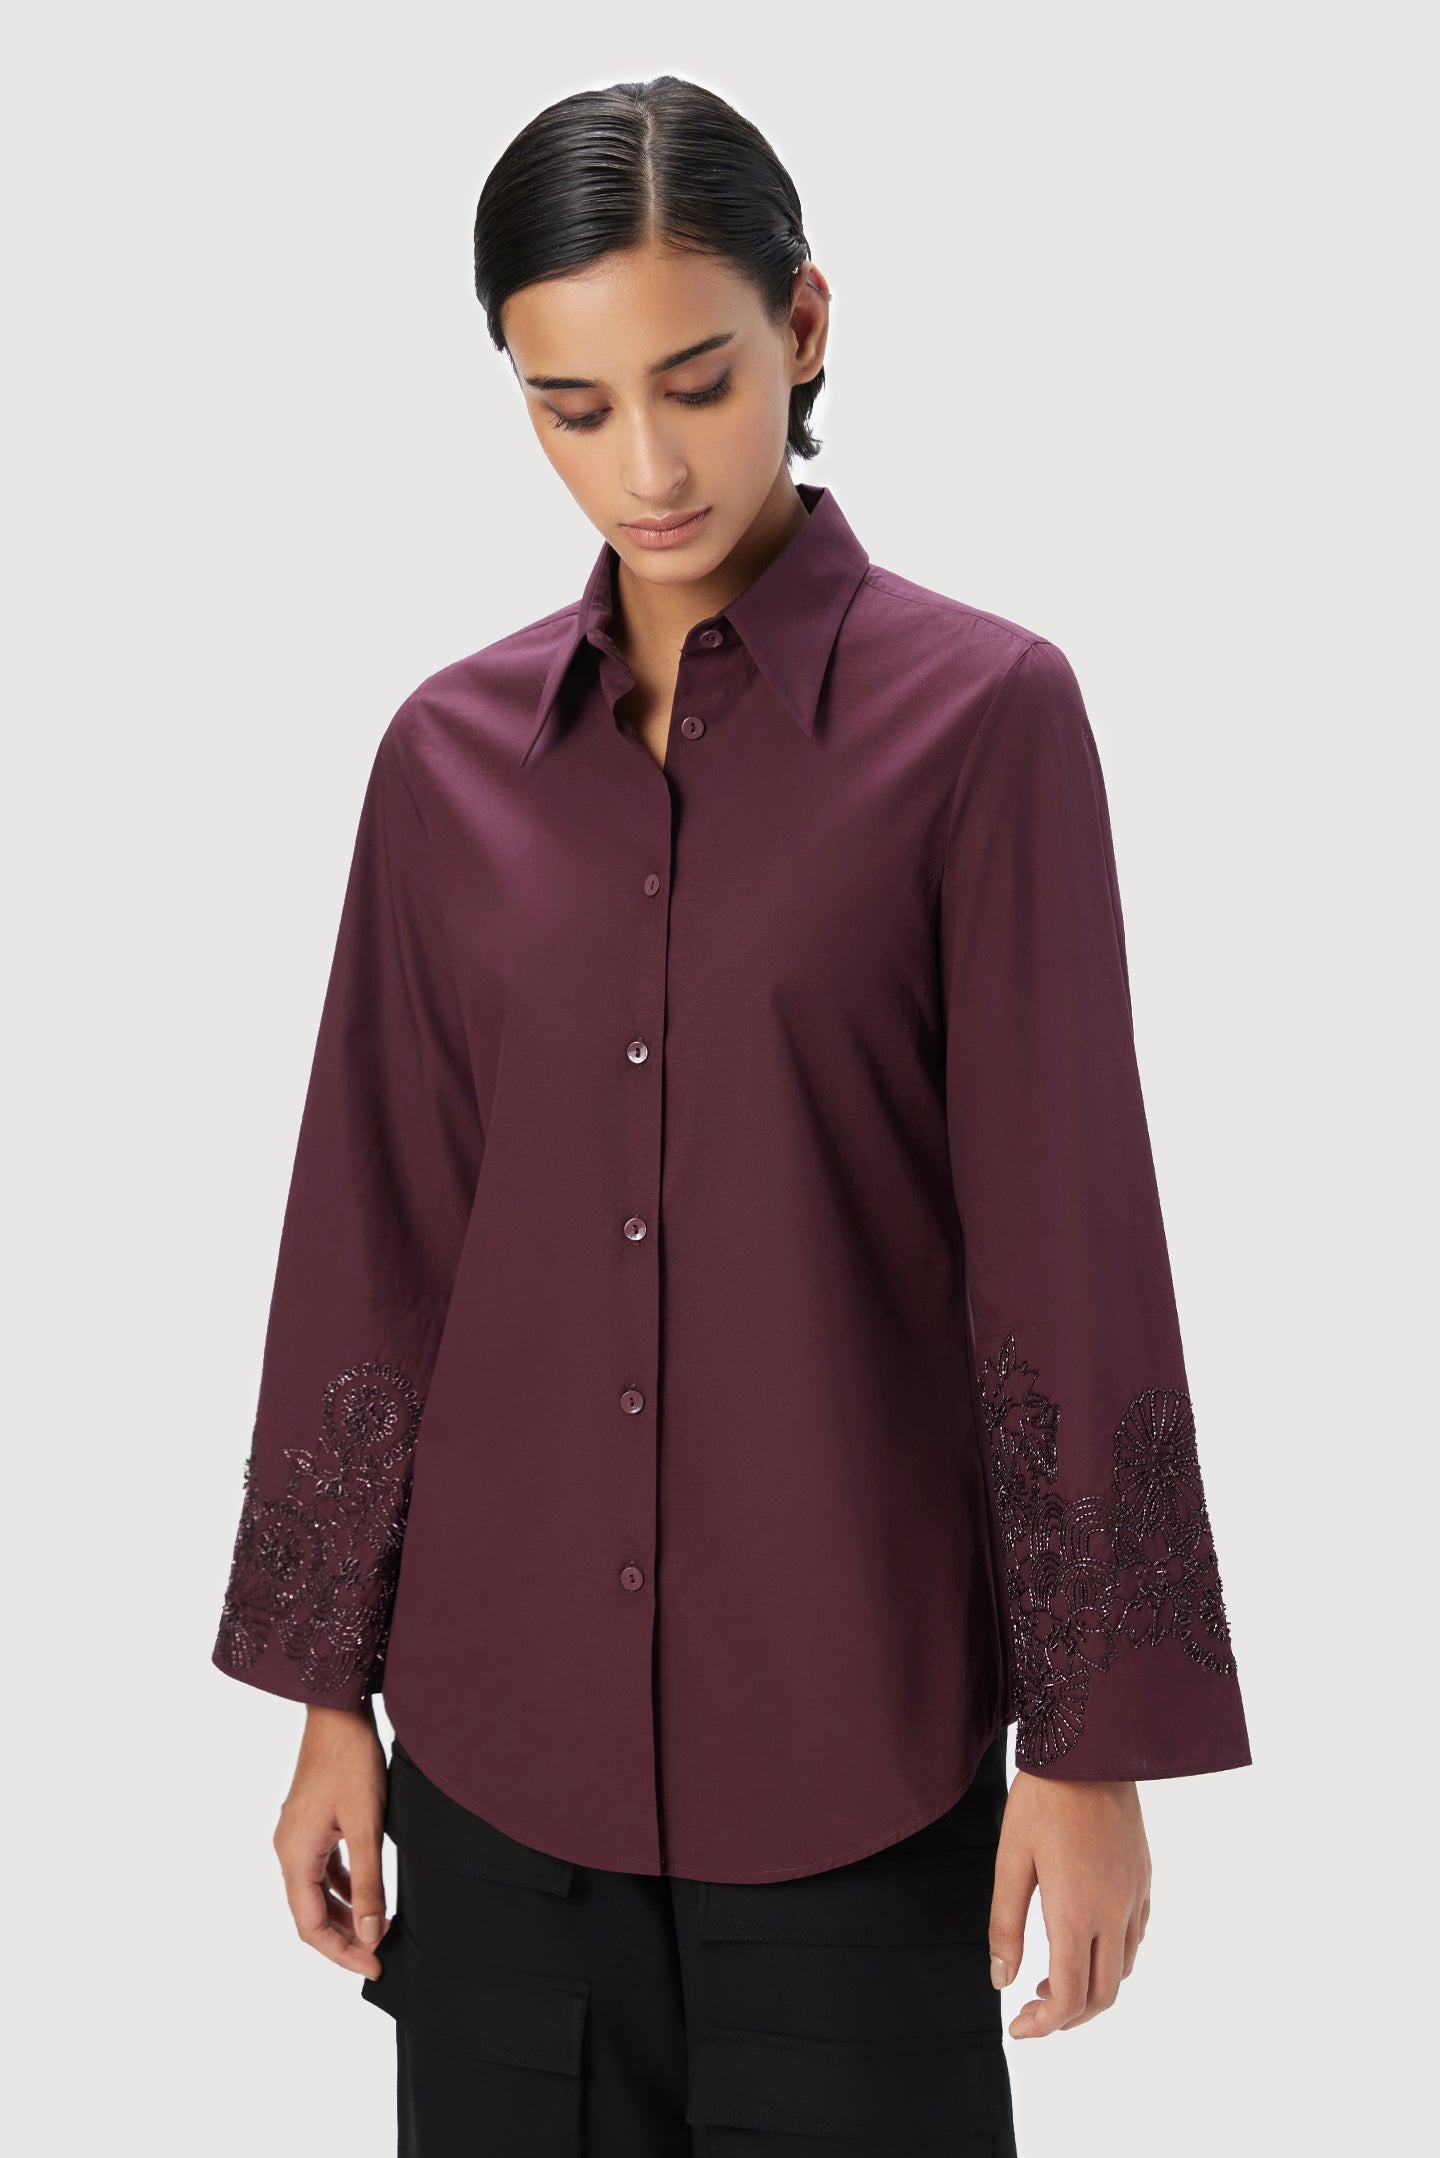 Slim Fit Button Down Shirt With Bell Sleeves And Tone On Tone Floral Beads Embroidery